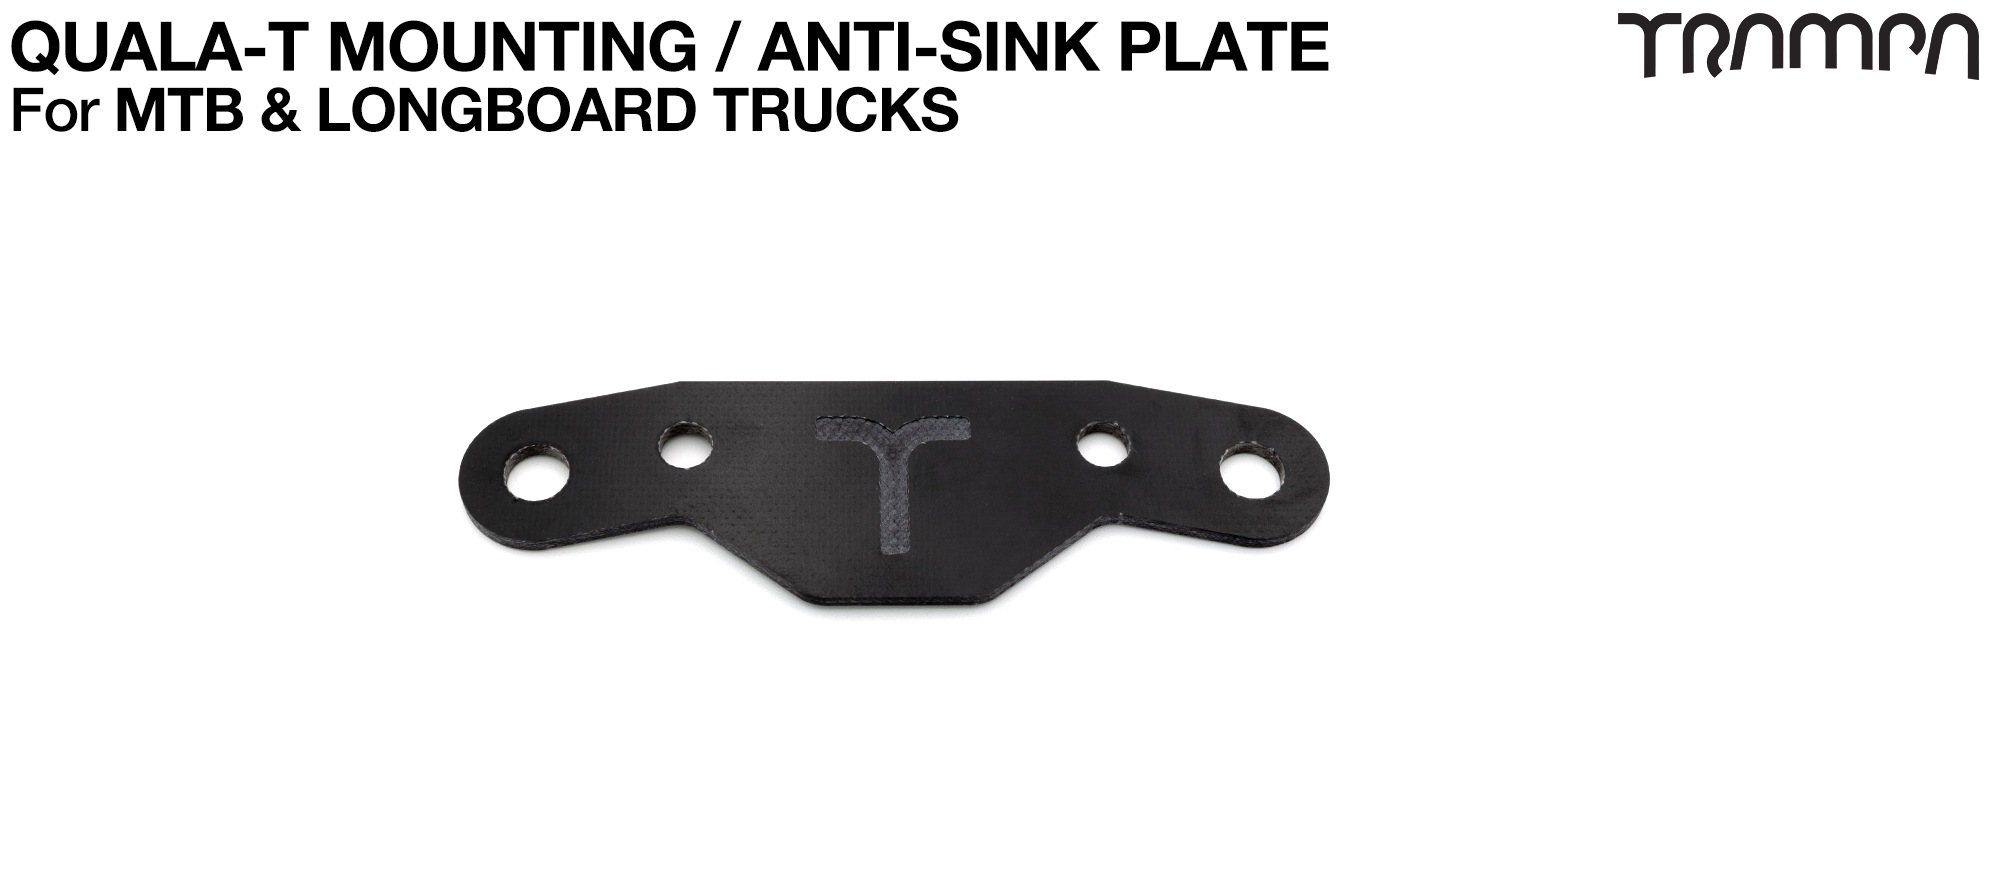 QUALA-T Truck Bolt Mounting Panel / Anti-Sink Plate / Cable Tidy